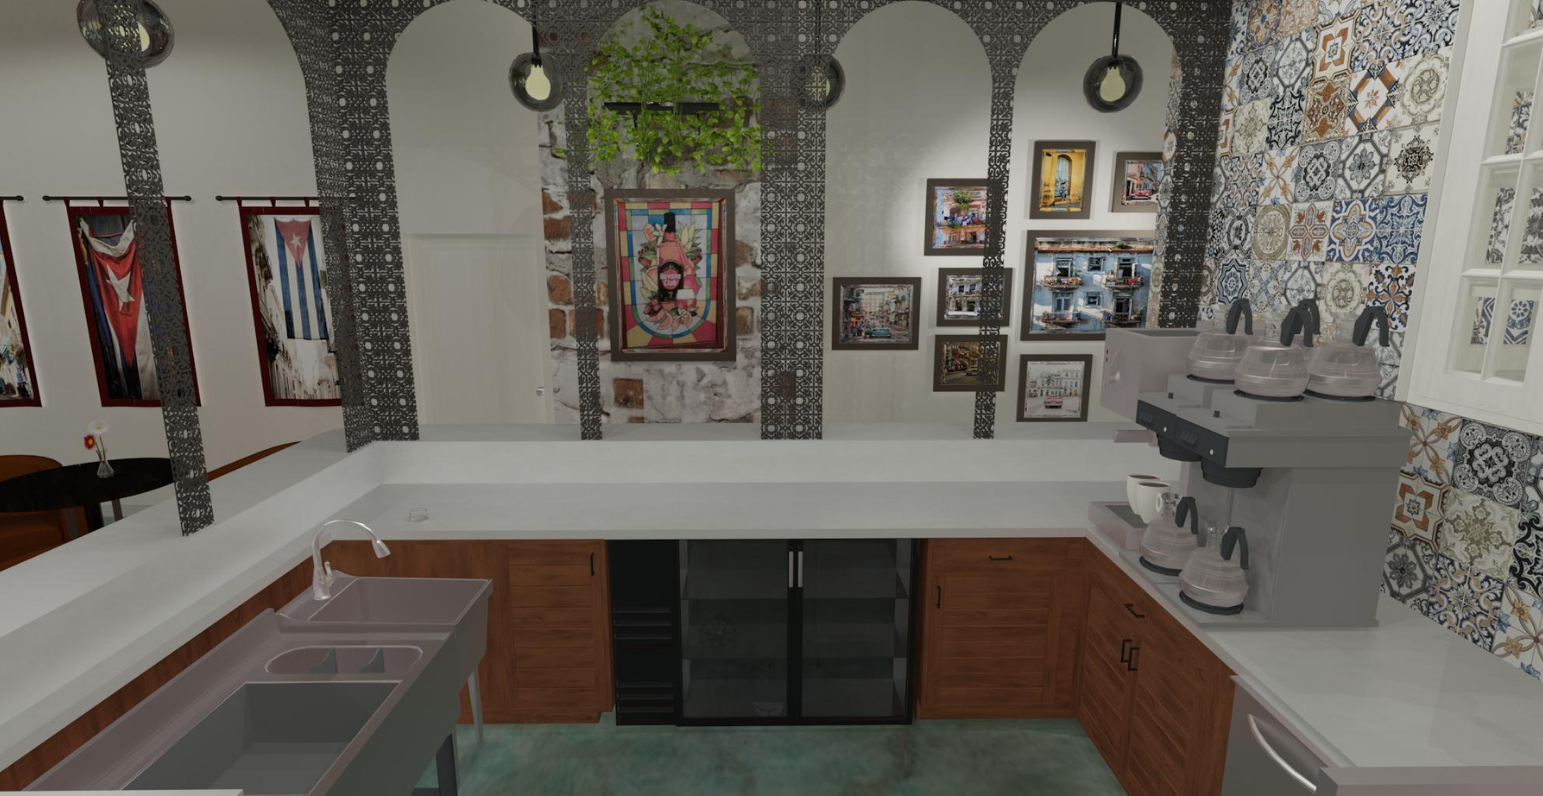 An animated render of the view from behind the bar at the new Soul de Cuba restaurant, which has modern archway designs, white countertops and wooden accents with luxury finishes, designed by Creative Touch Interiors.